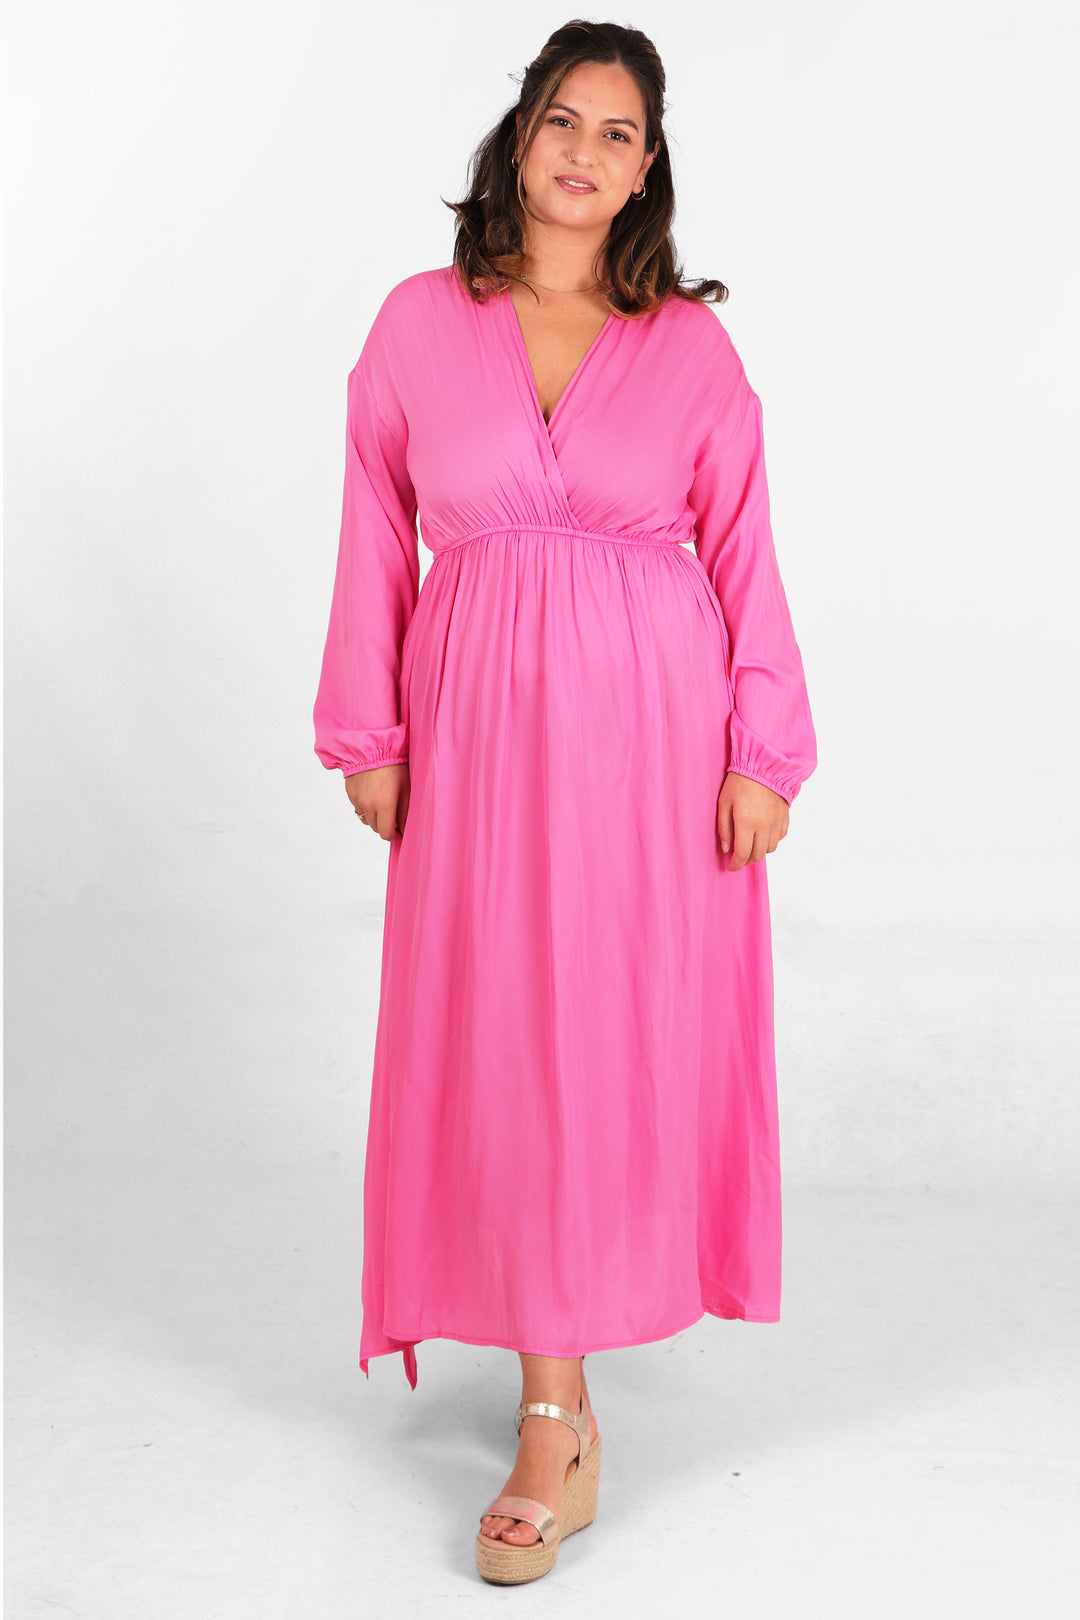 plain pink faux wrap maxi dress with elasticated waist and long sleeves in hot pink